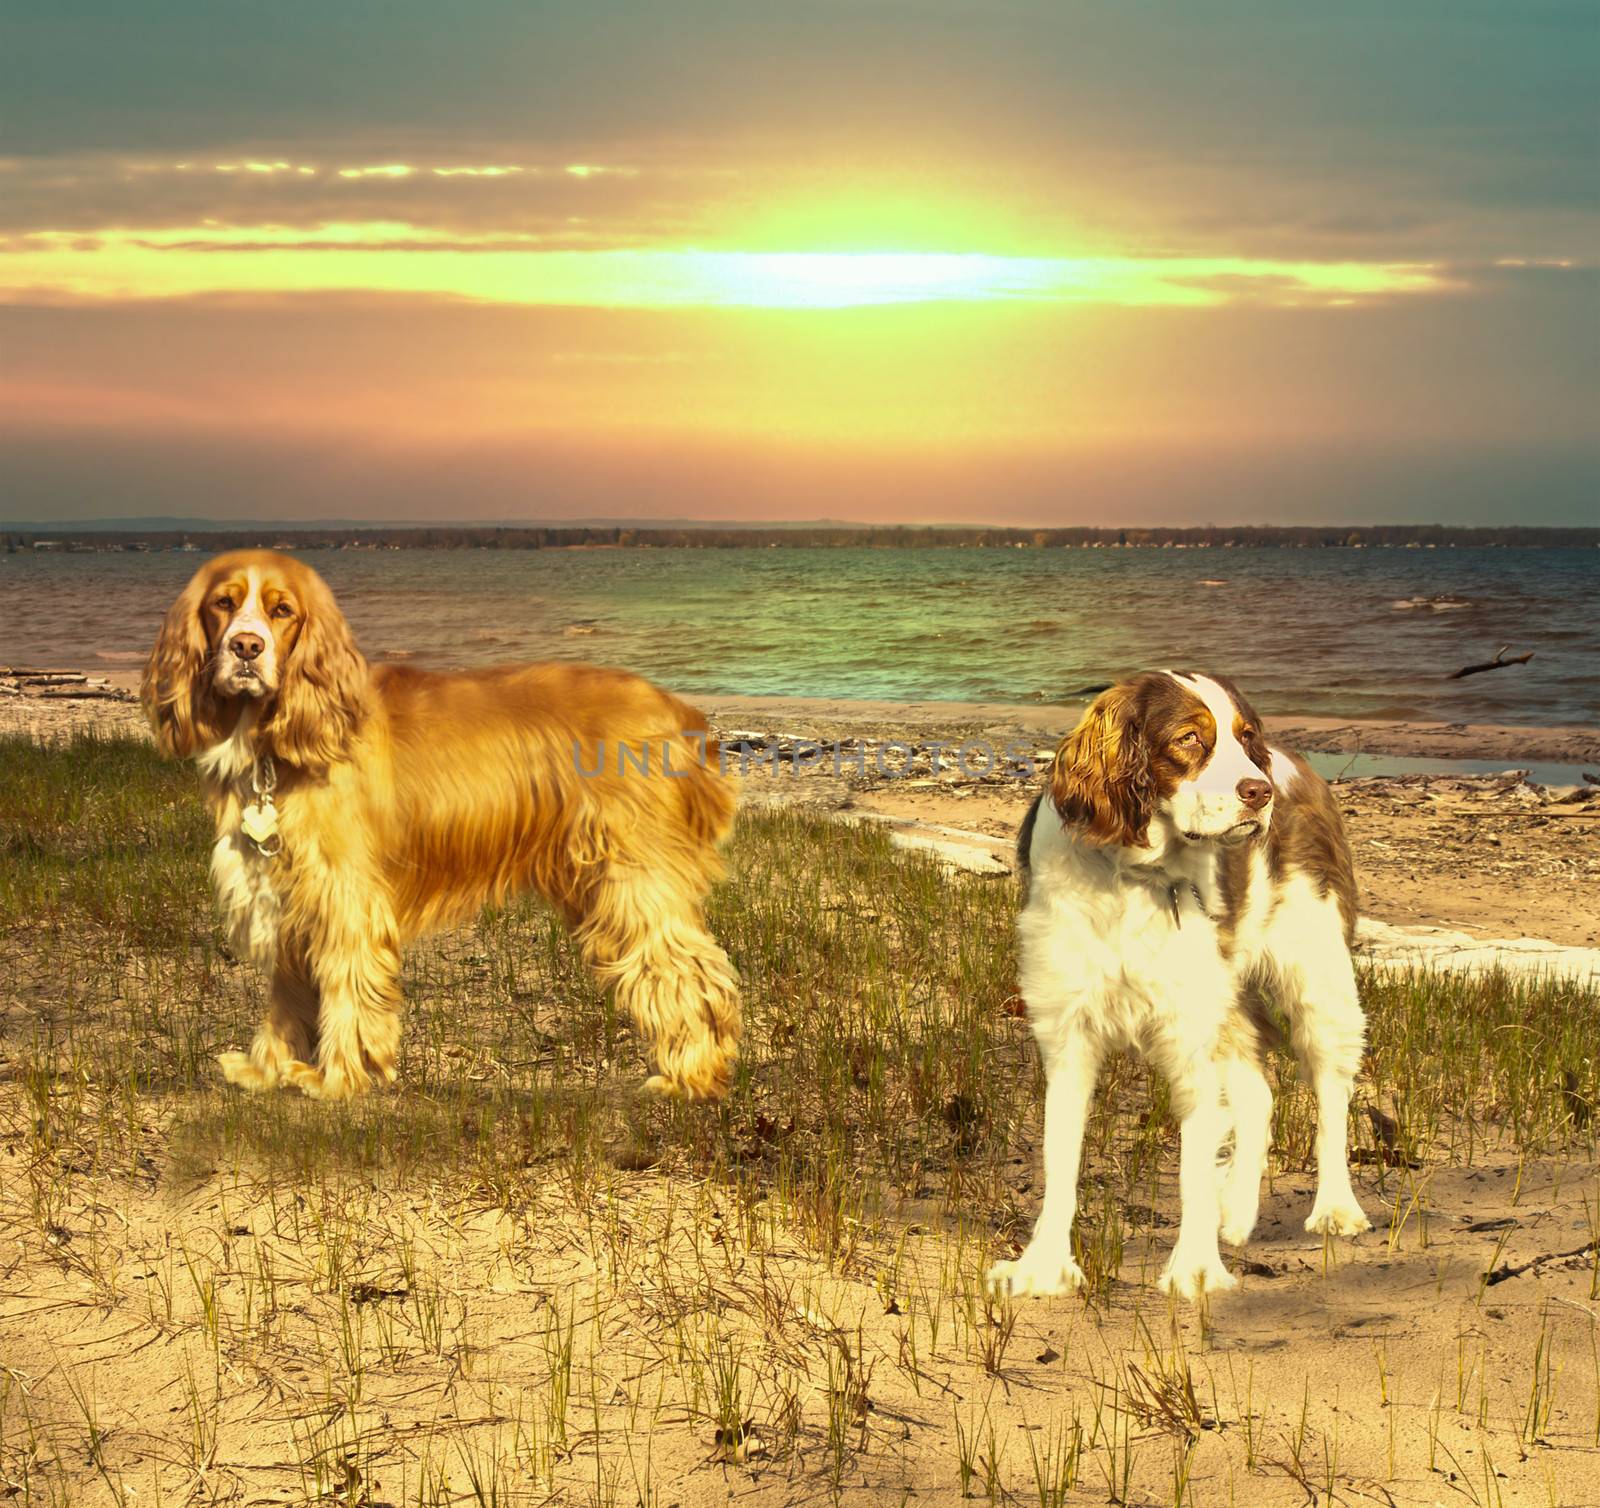 dogs on a beach by debramillet